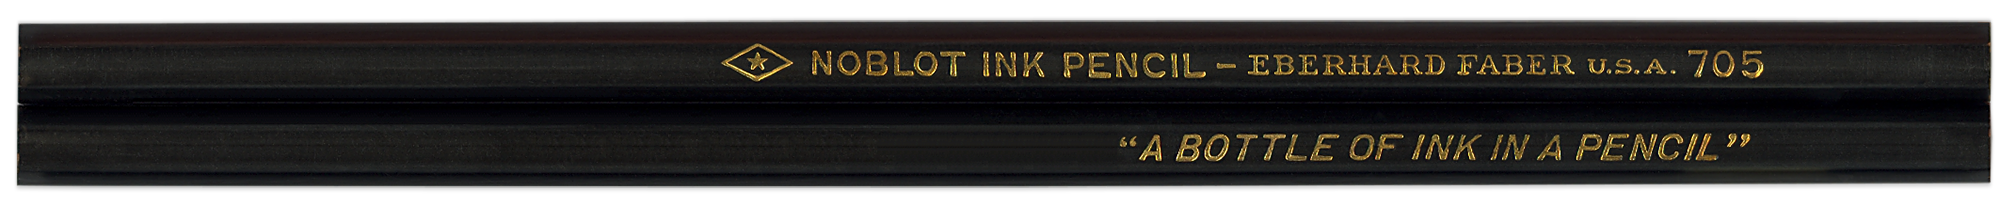 Noblot Ink Pencil 705 by Eberhard Faber | Brand Name Pencils